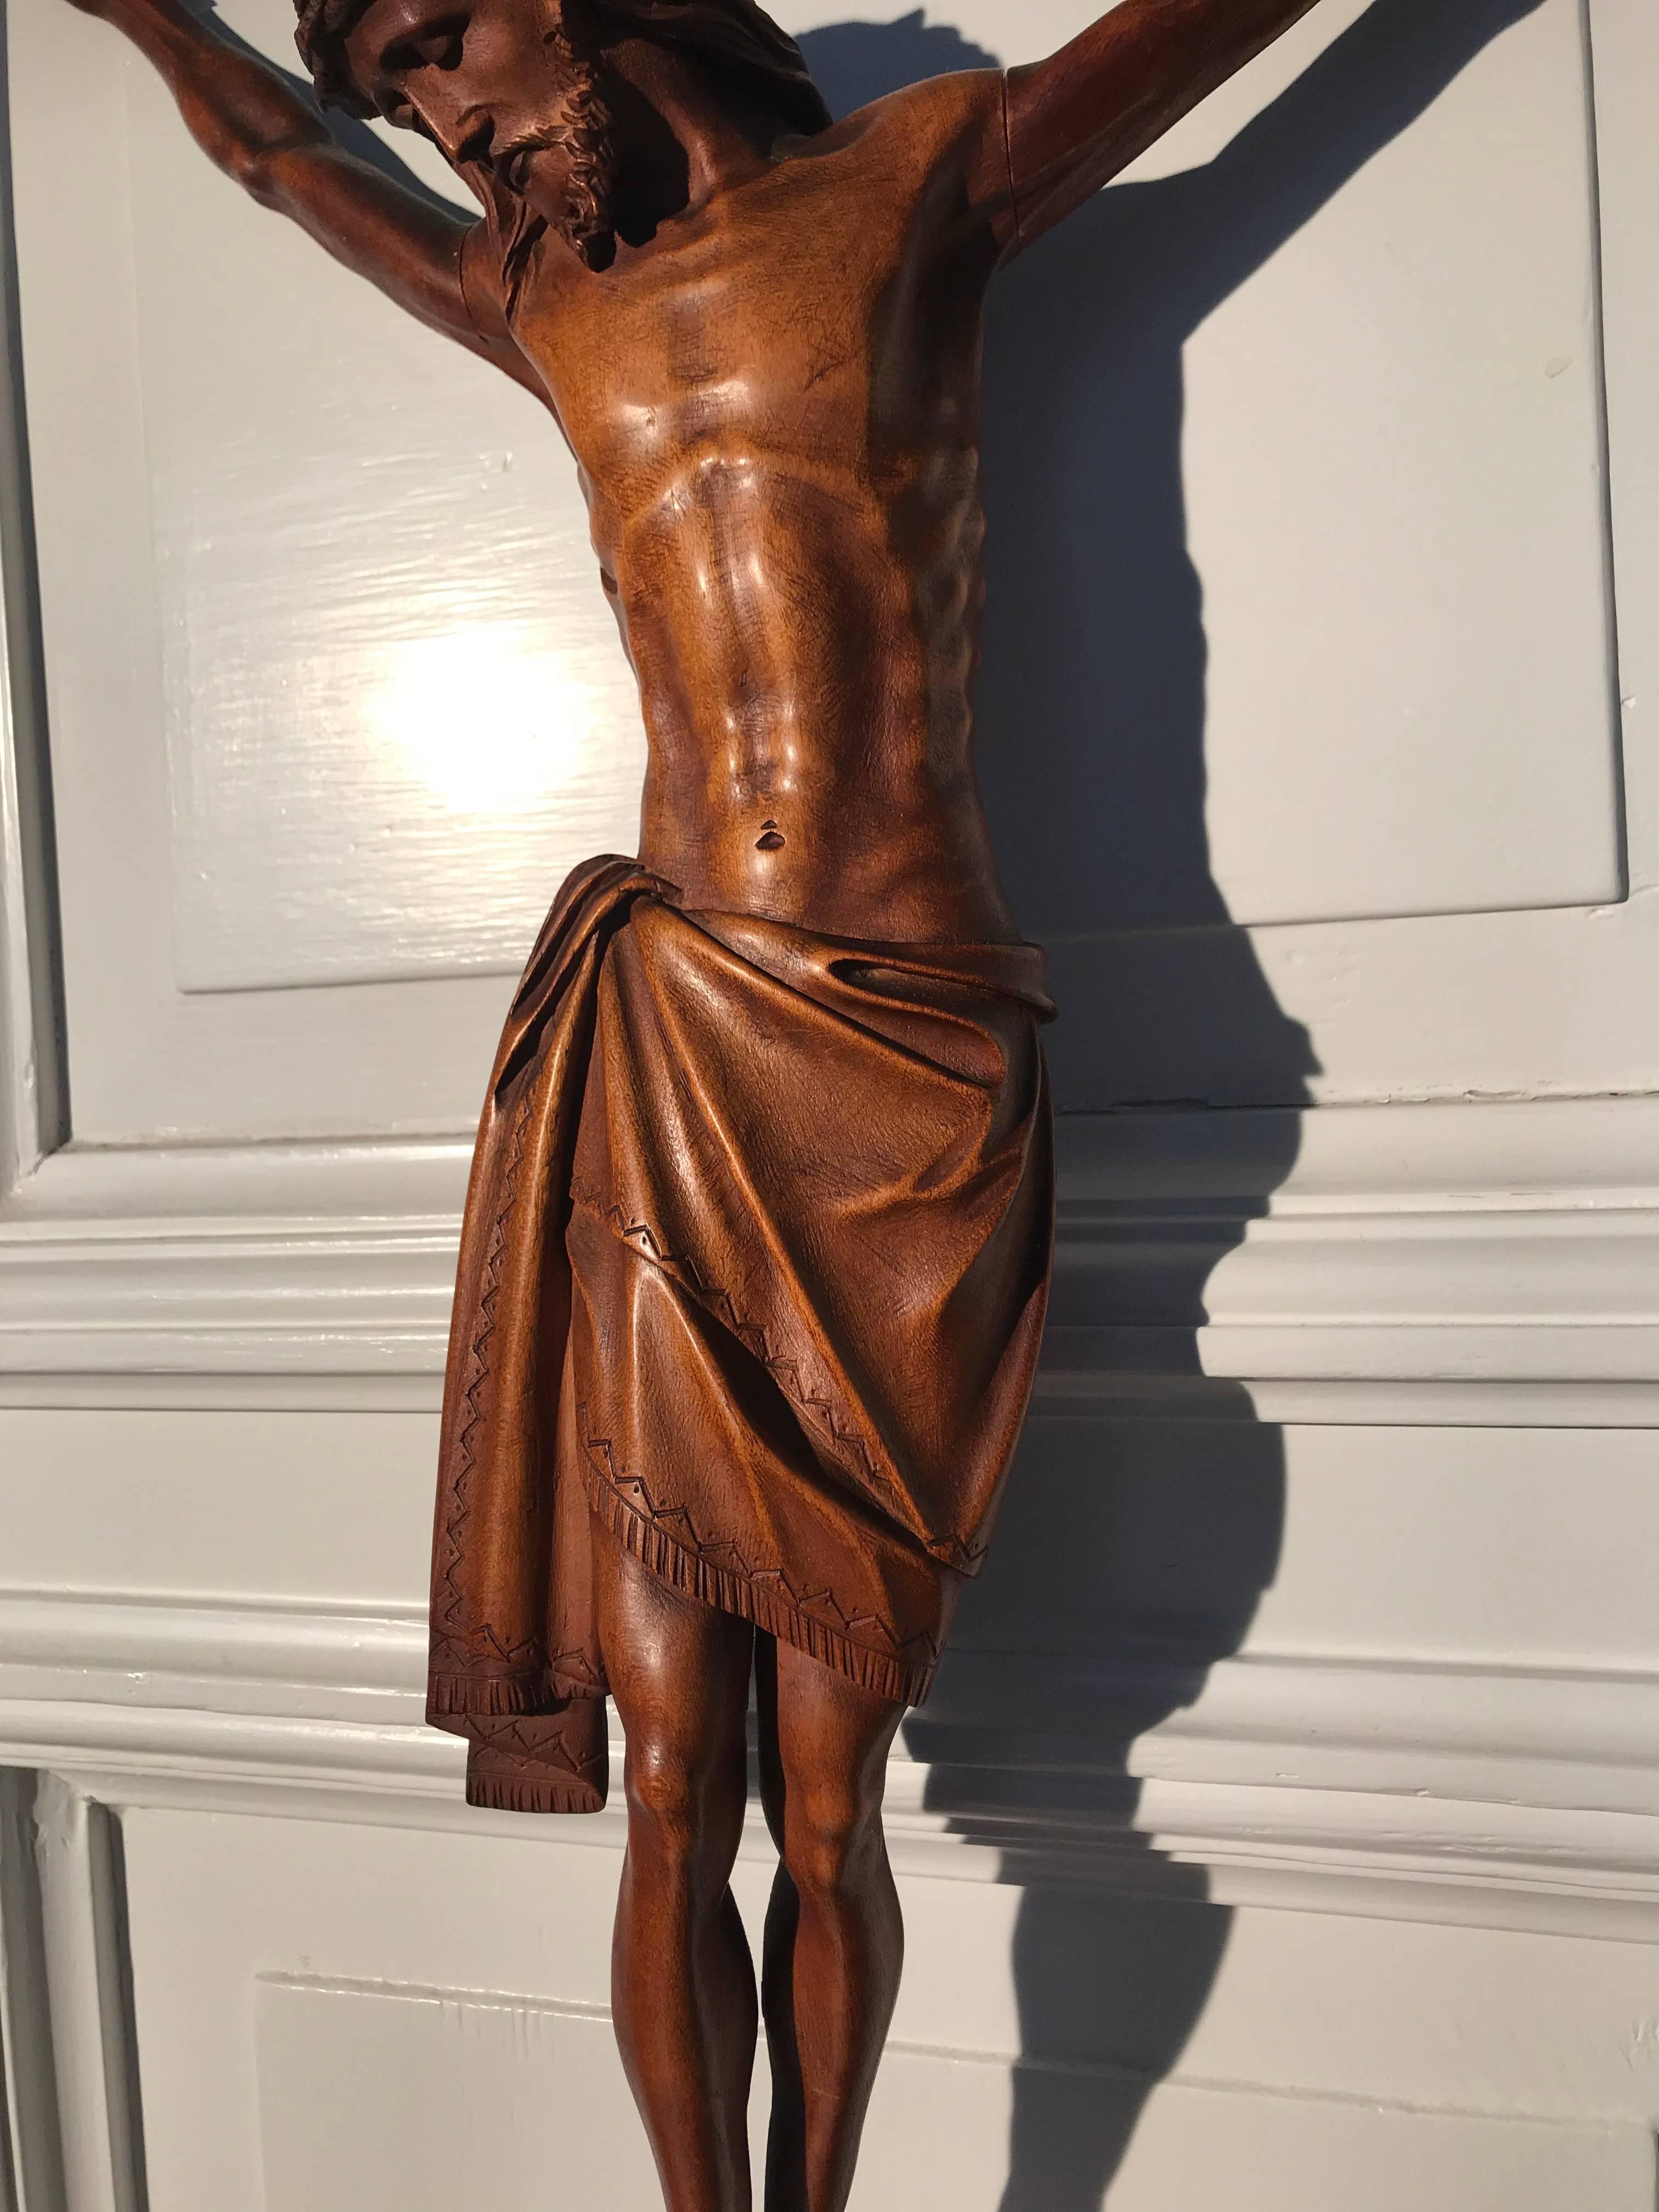 Early 1900s Finest Handcarved Wood Corpus of Christ Sculpture for Wall Mounting 5